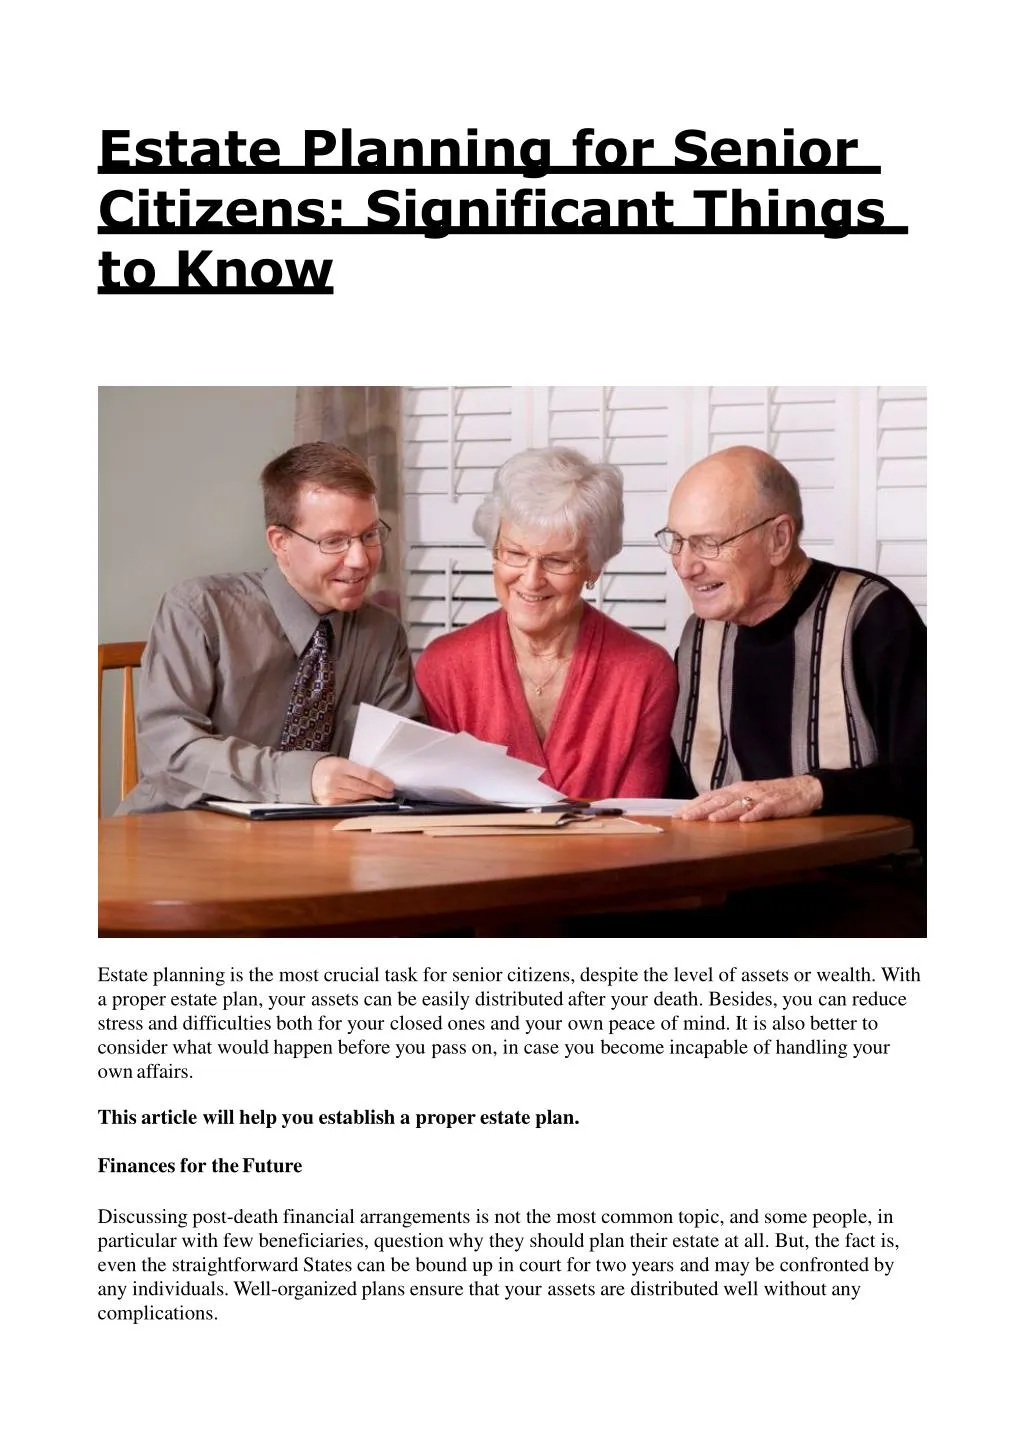 estate planning for senior citizens significant things to know